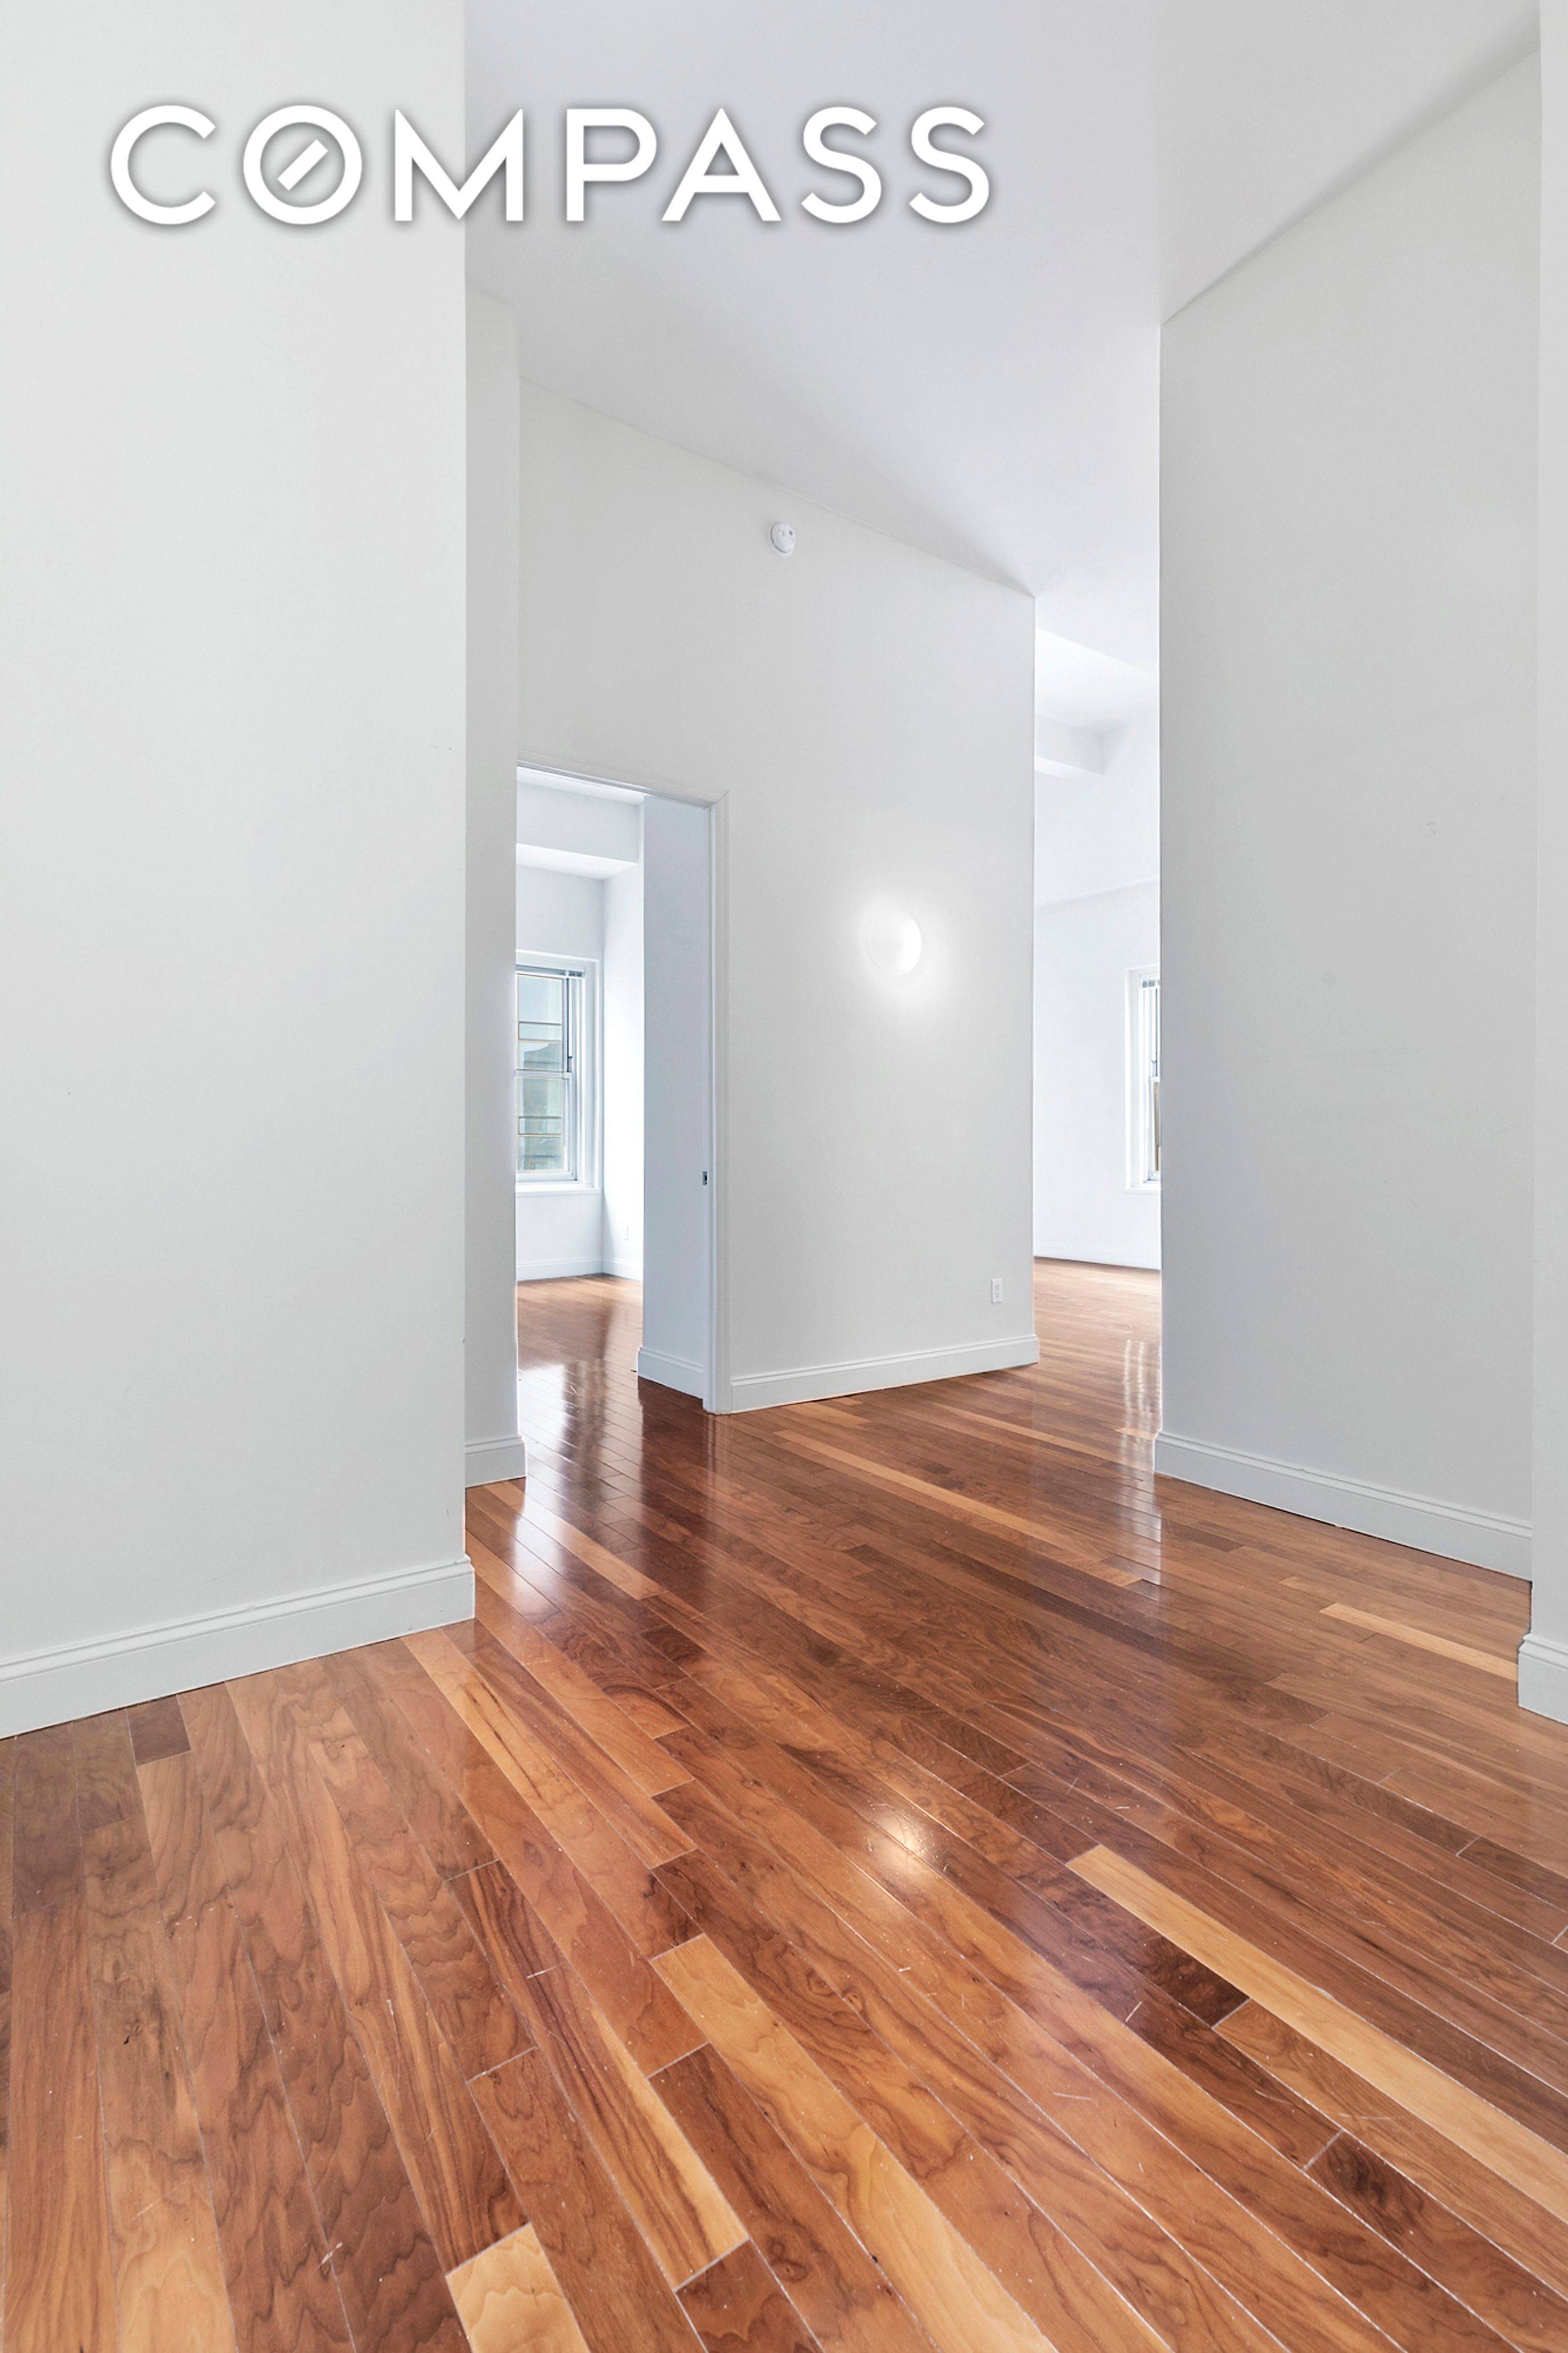 This corner one bedroom apartment with 16 ceilings throughout offers spectacular views of downtown New York and water views from oversized windows.